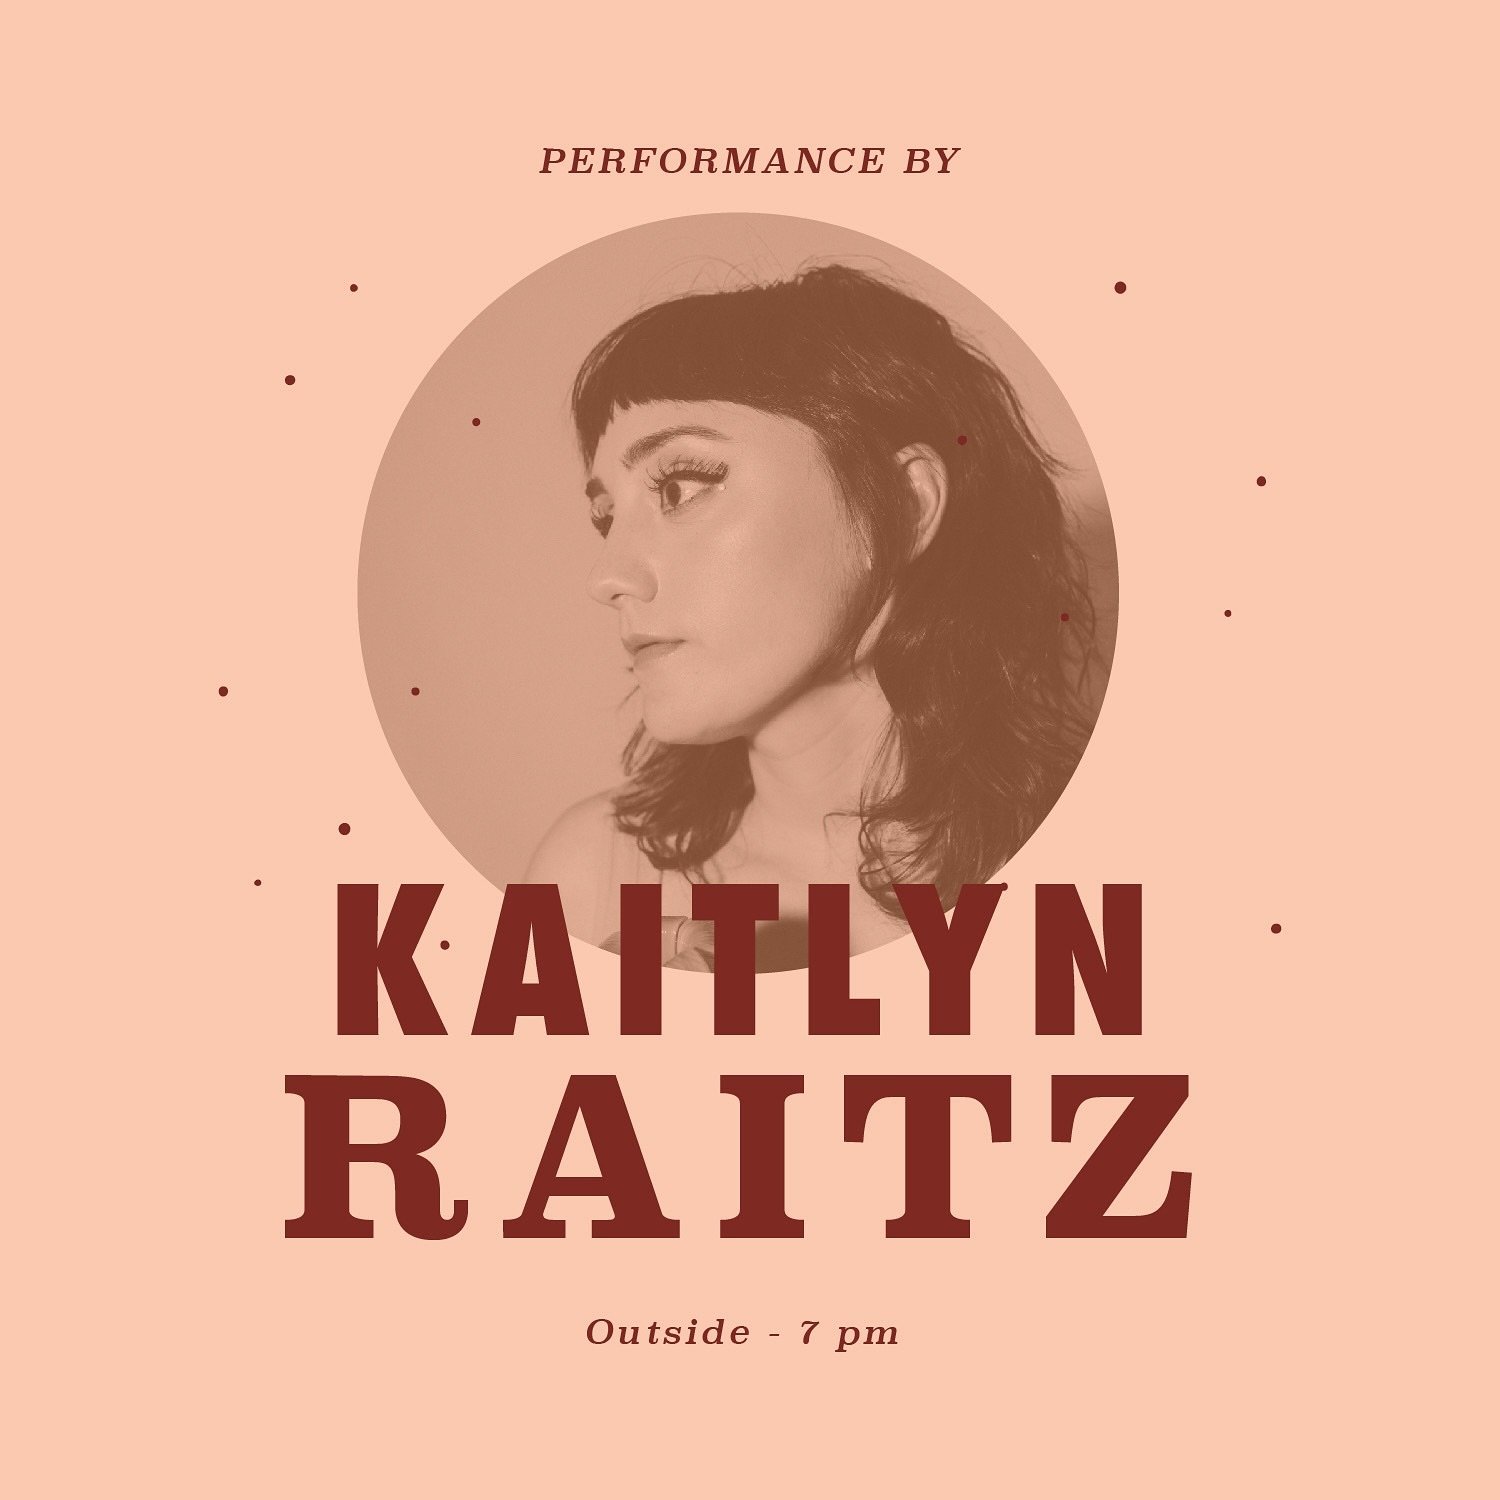 COOP Gallery&rsquo;s Garden of Earthly Delights is pleased to welcome @kraitz and her cello performing live at 7 PM. Live cello among @beth.reitmeyer and @ashleighyorkart art on the lawn? You won&rsquo;t want to miss this beautiful evening. Get your 